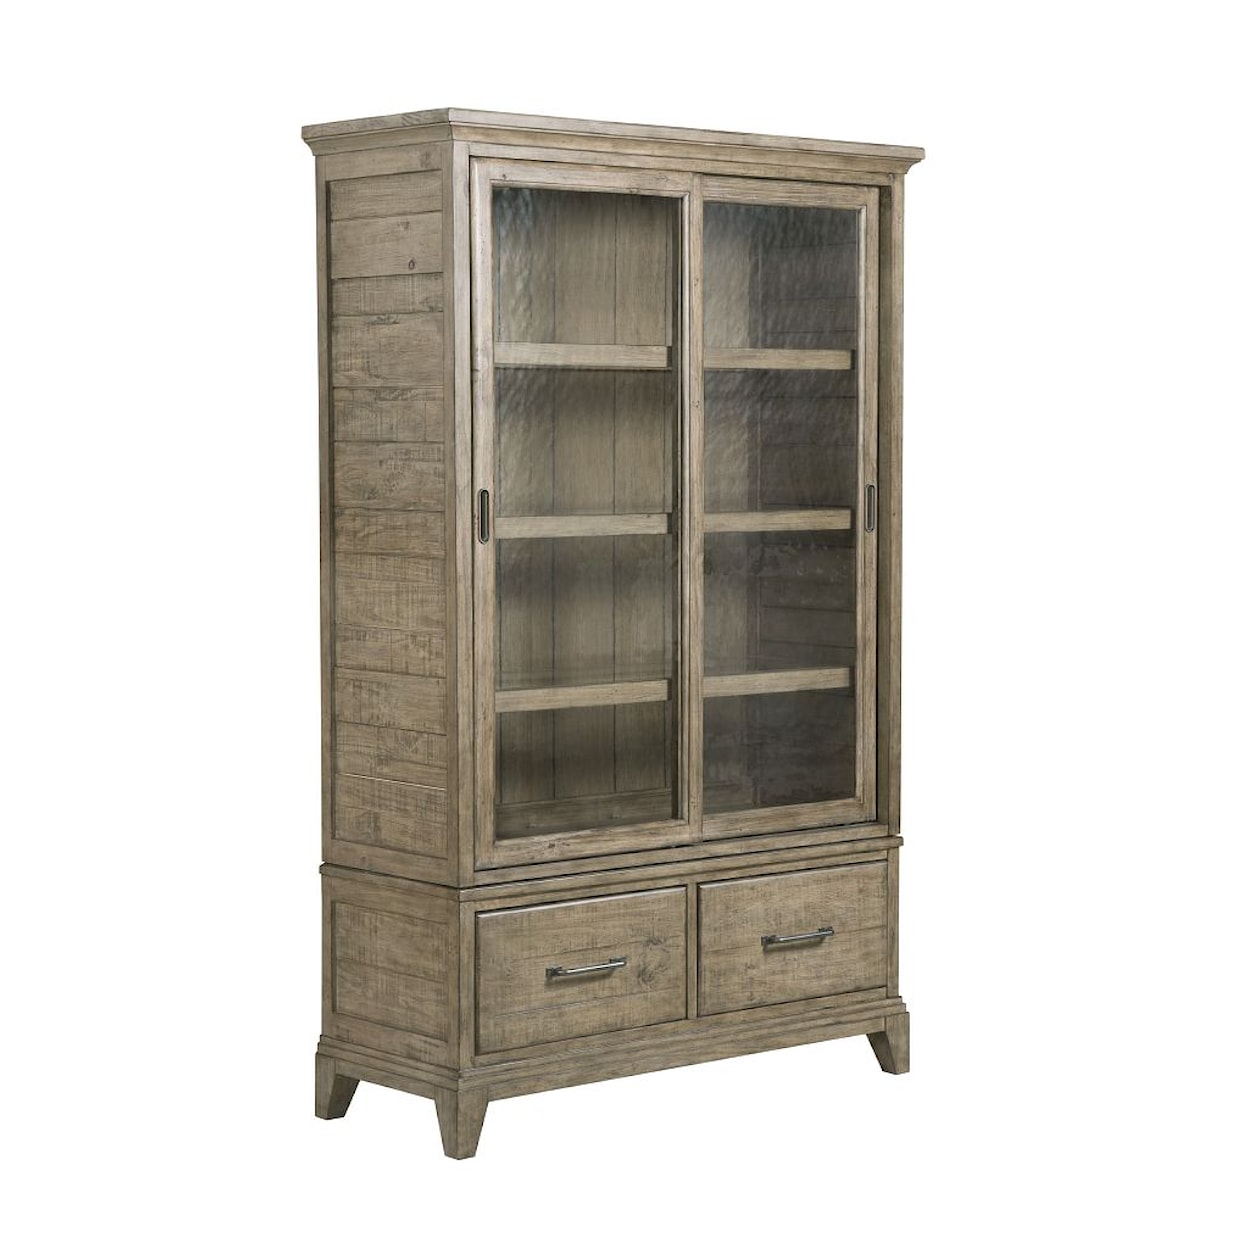 Kincaid Furniture Plank Road Darby Display Cabinet